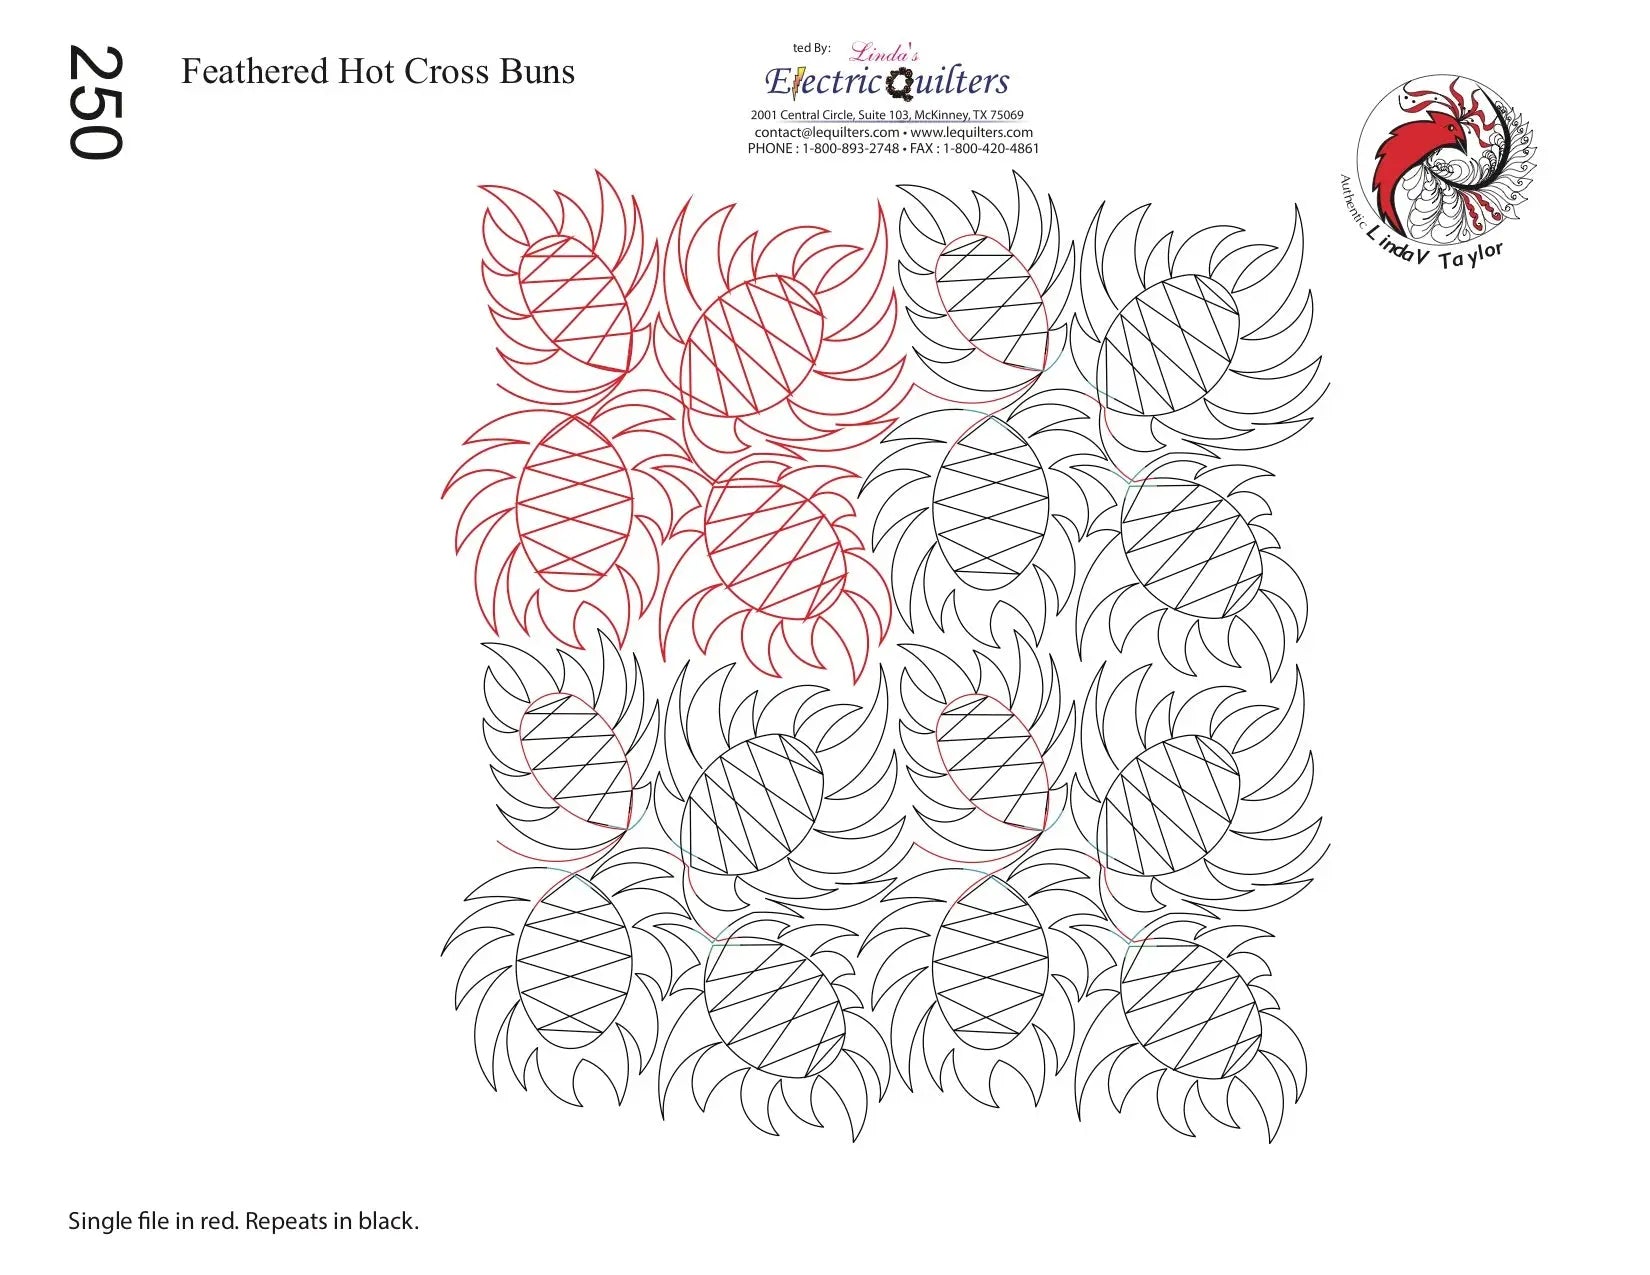 250 Feathered Hot Cross Buns Pantograph by Linda V. Taylor - Linda's Electric Quilters